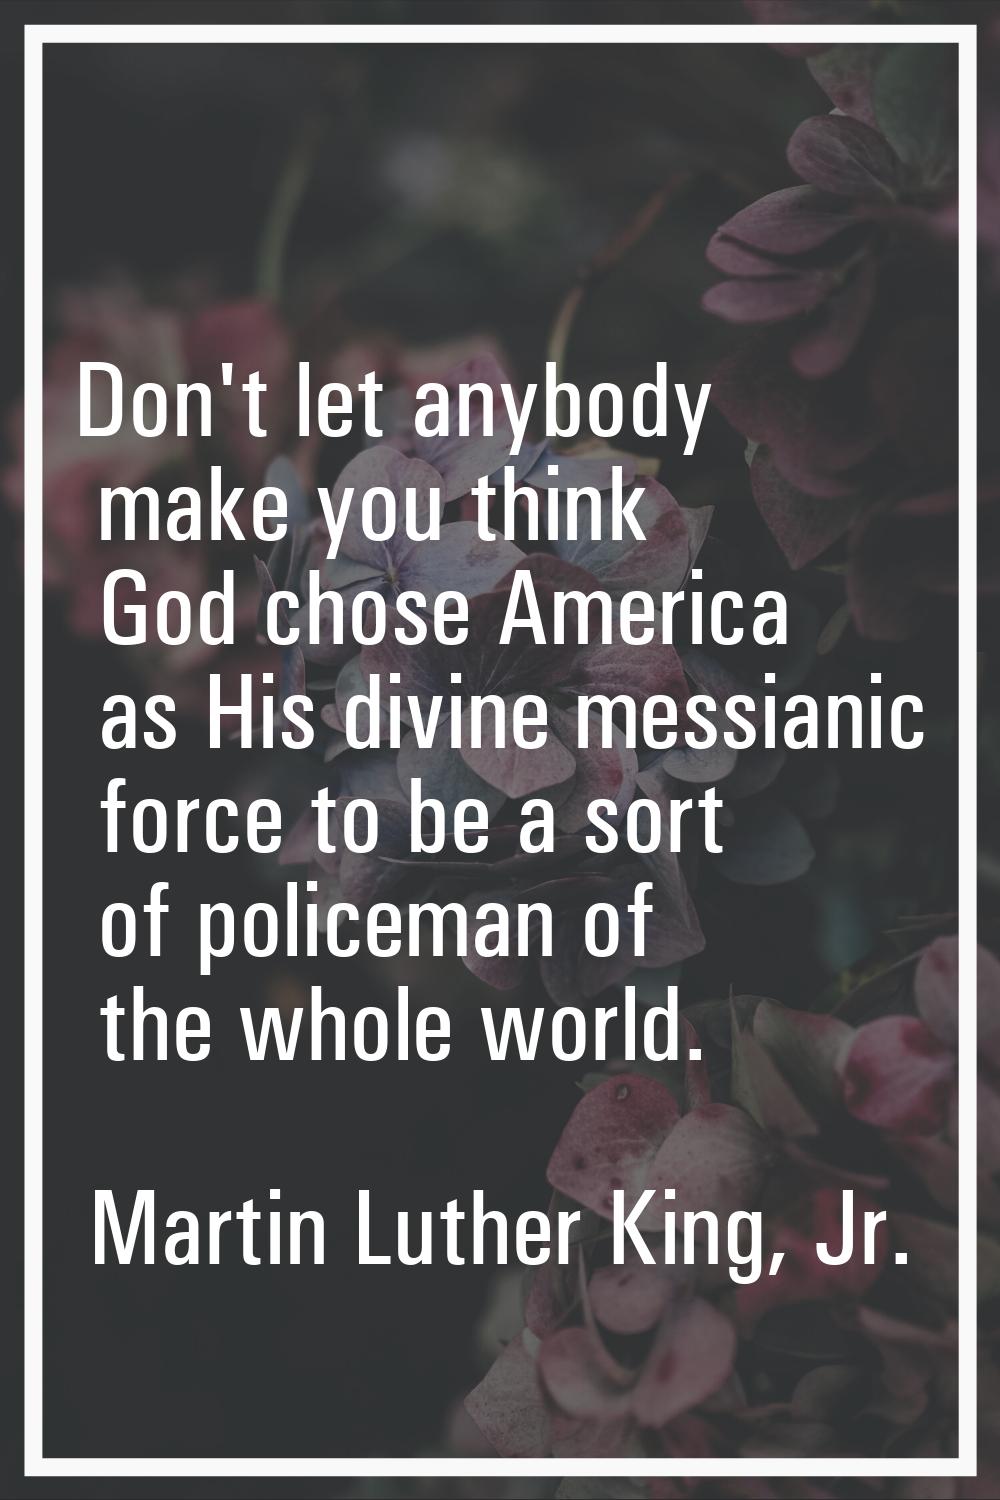 Don't let anybody make you think God chose America as His divine messianic force to be a sort of po